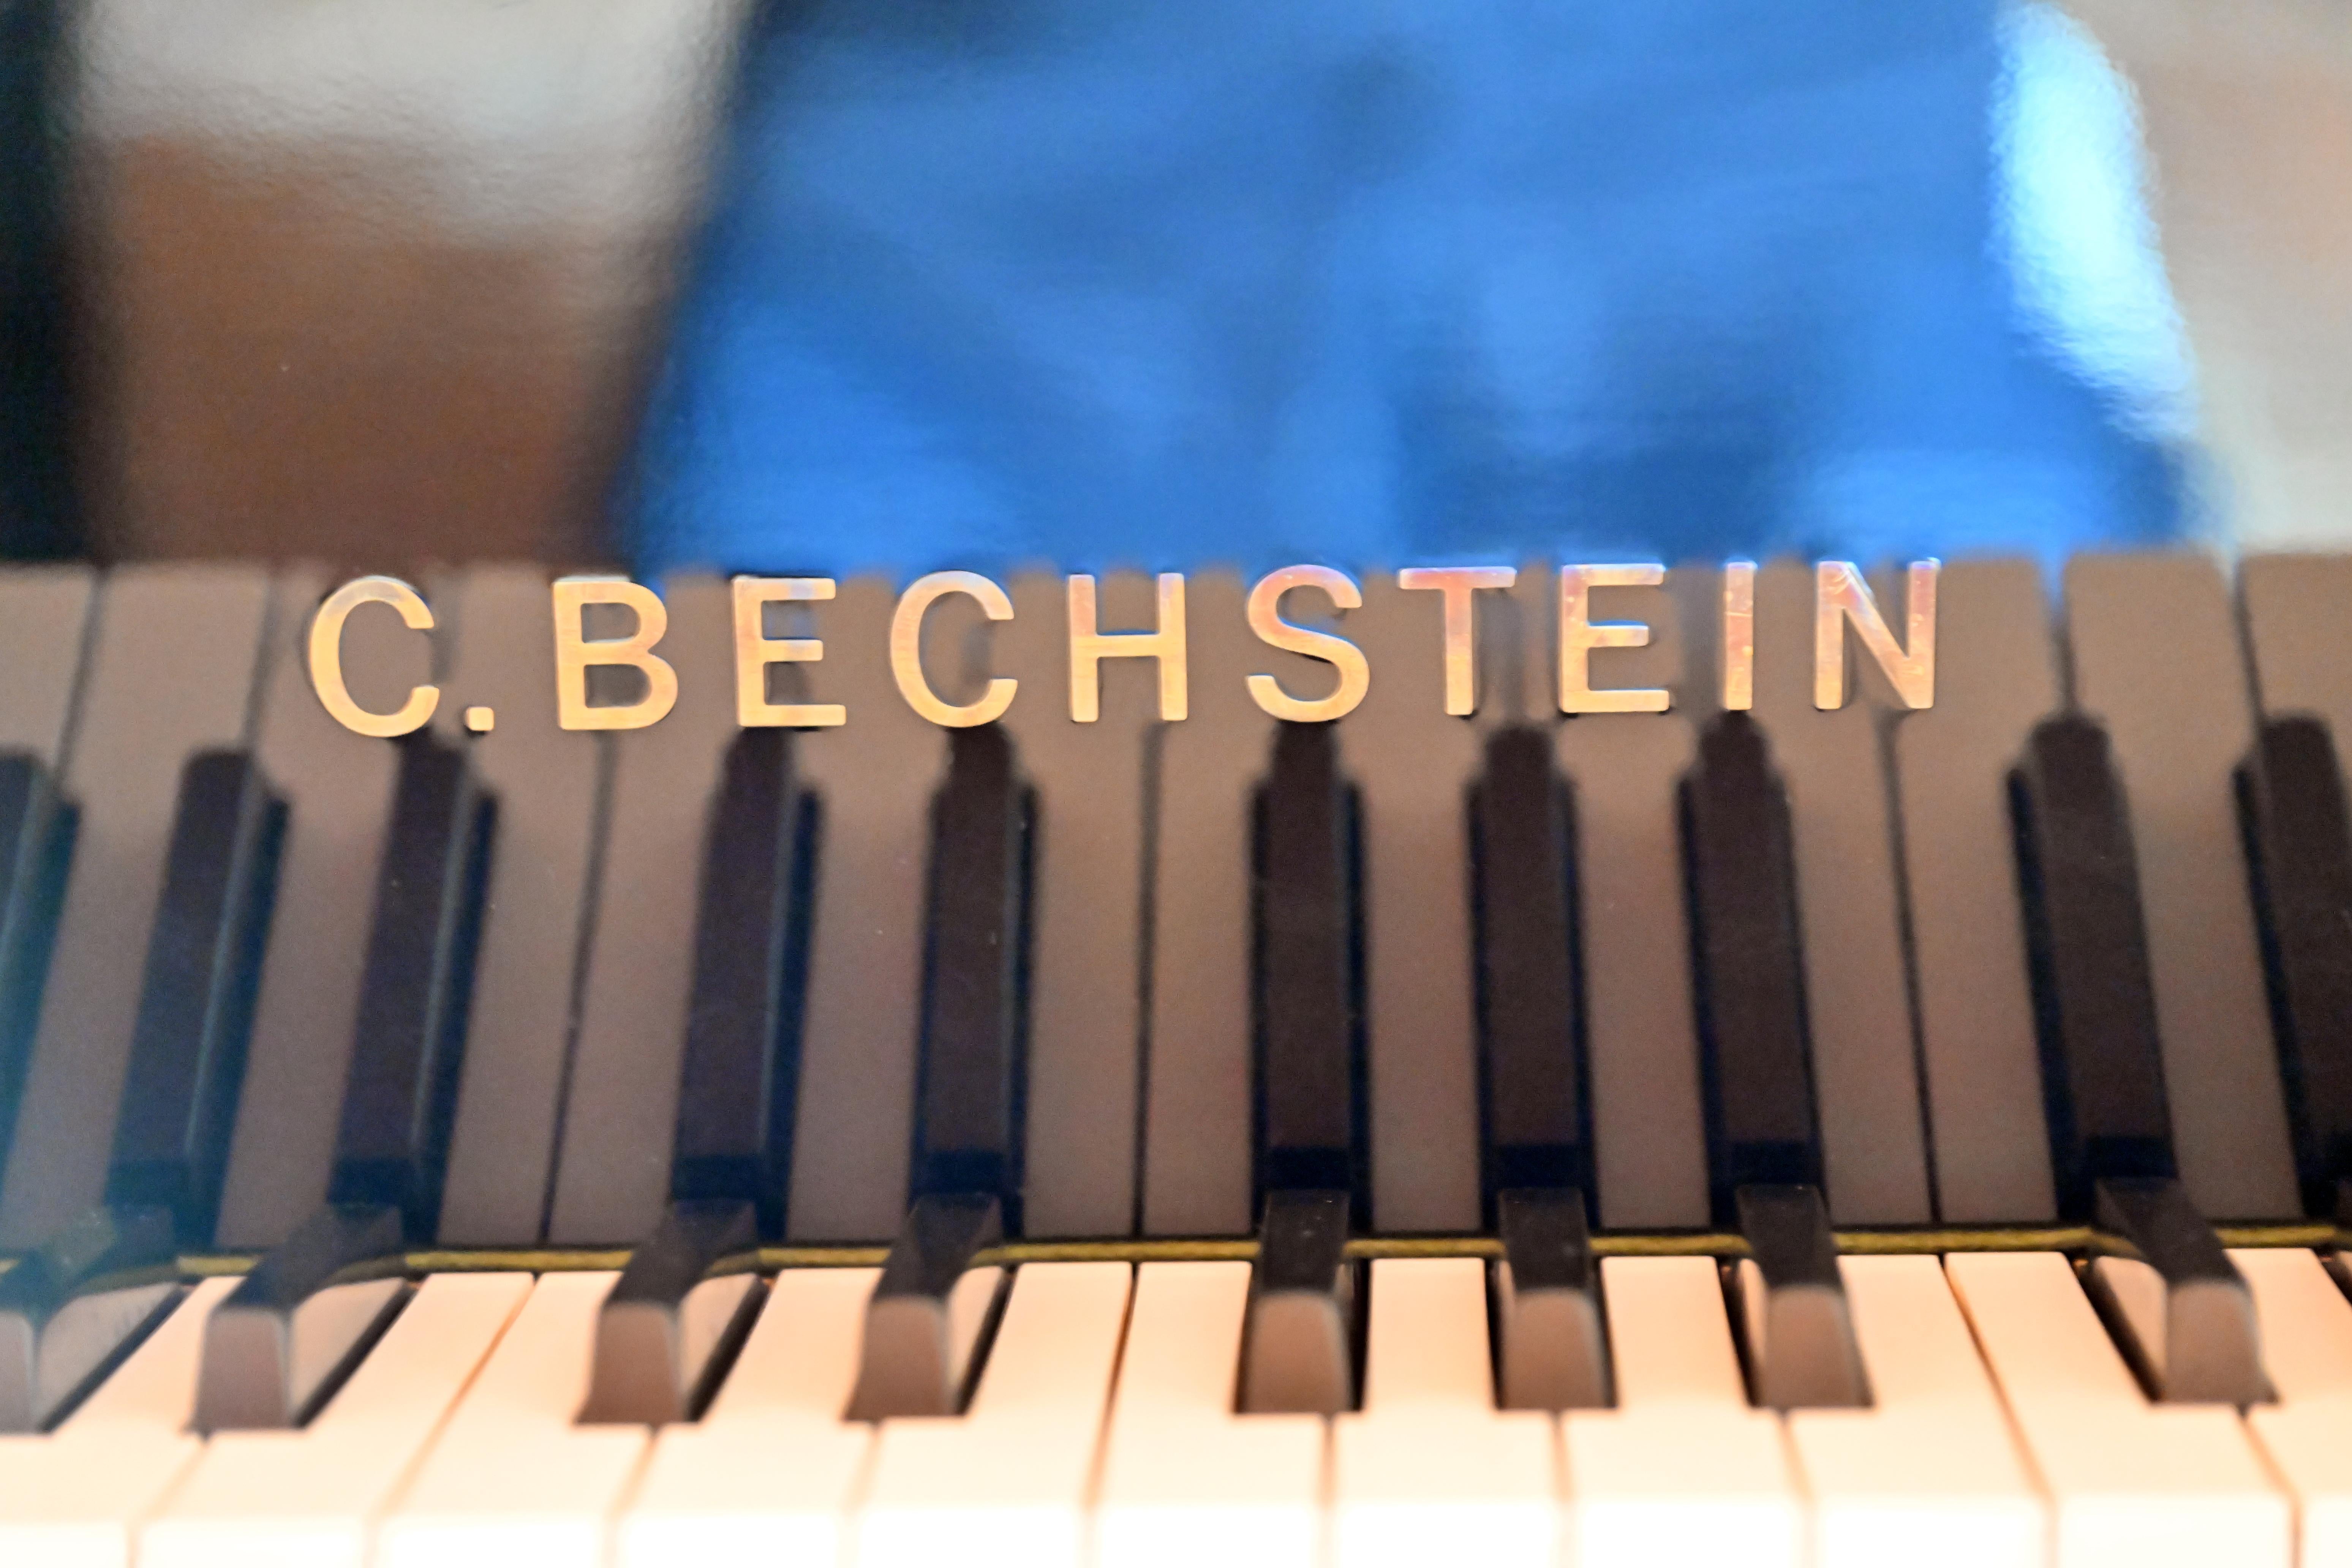 CARL BECHSTEIN B-88 CONCERT GRAND PIANO - 1995

Black Gloss Finish

Dimensions:
D 6'9'' / 208 cm
W 60,6'' / 154 cm
Weight   827 lbs / 375 kg

Shipping quote on demand.

Carl Bechstein Concert grand pianos are renowned for their colorful, richly